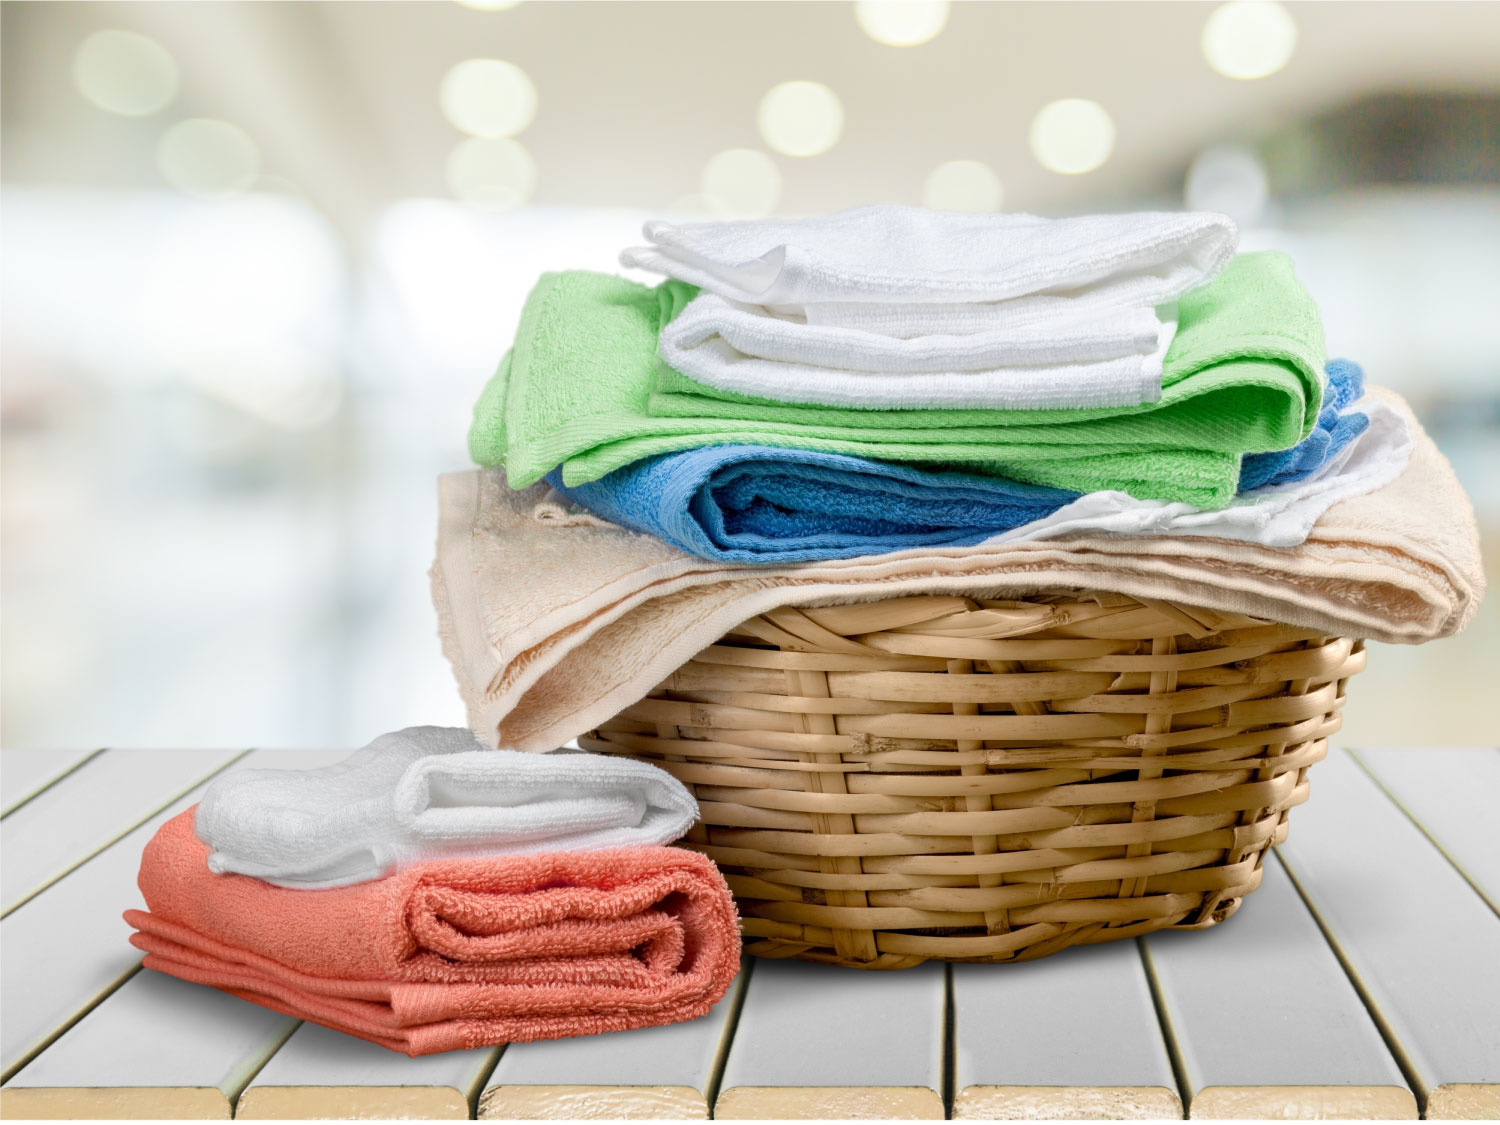 wicker laundry basket with clean towels